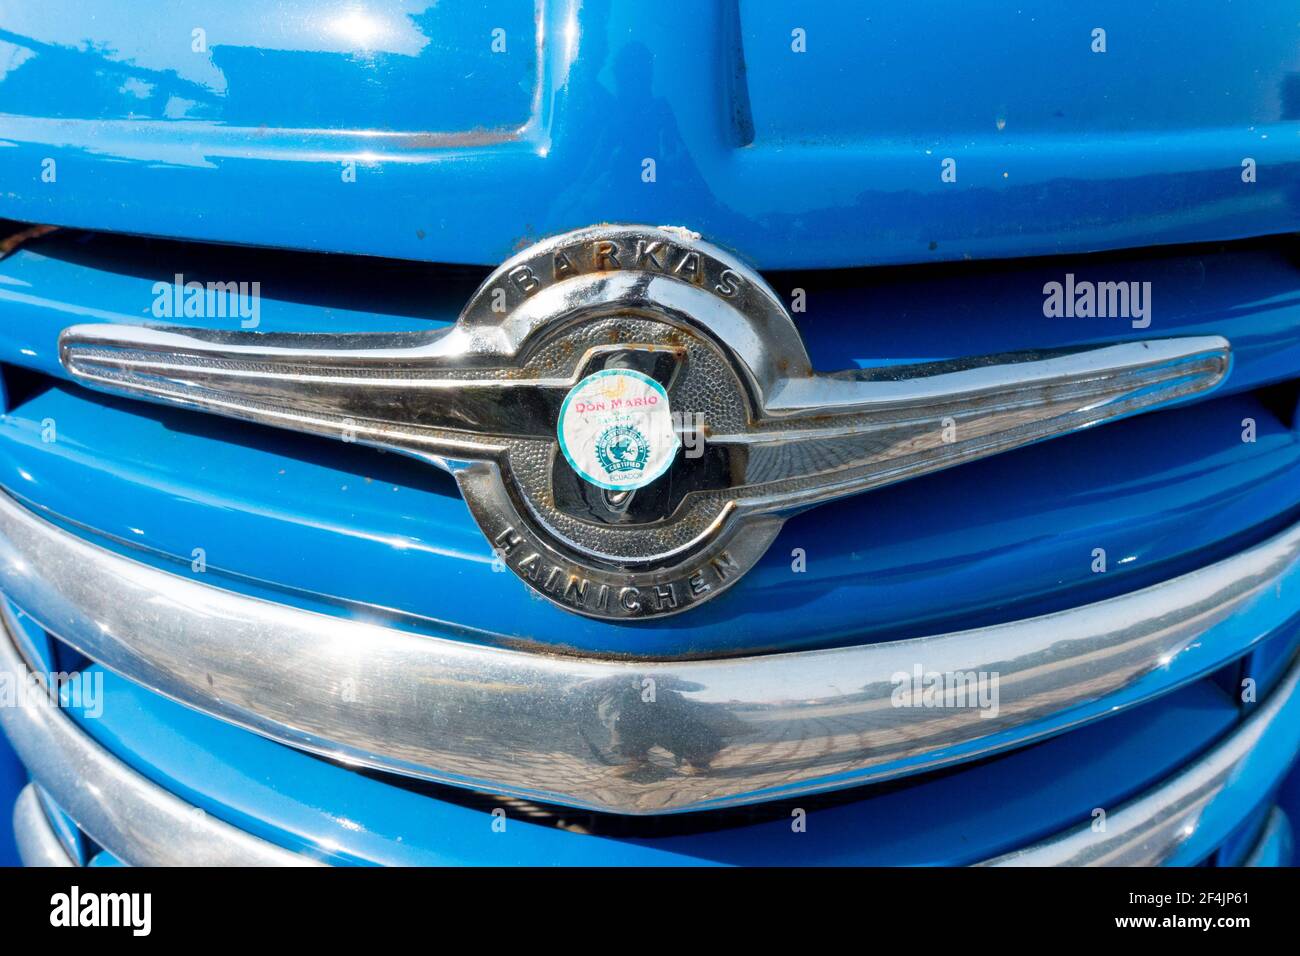 Barkas 901-2 from 50s grille mask, badge Stock Photo